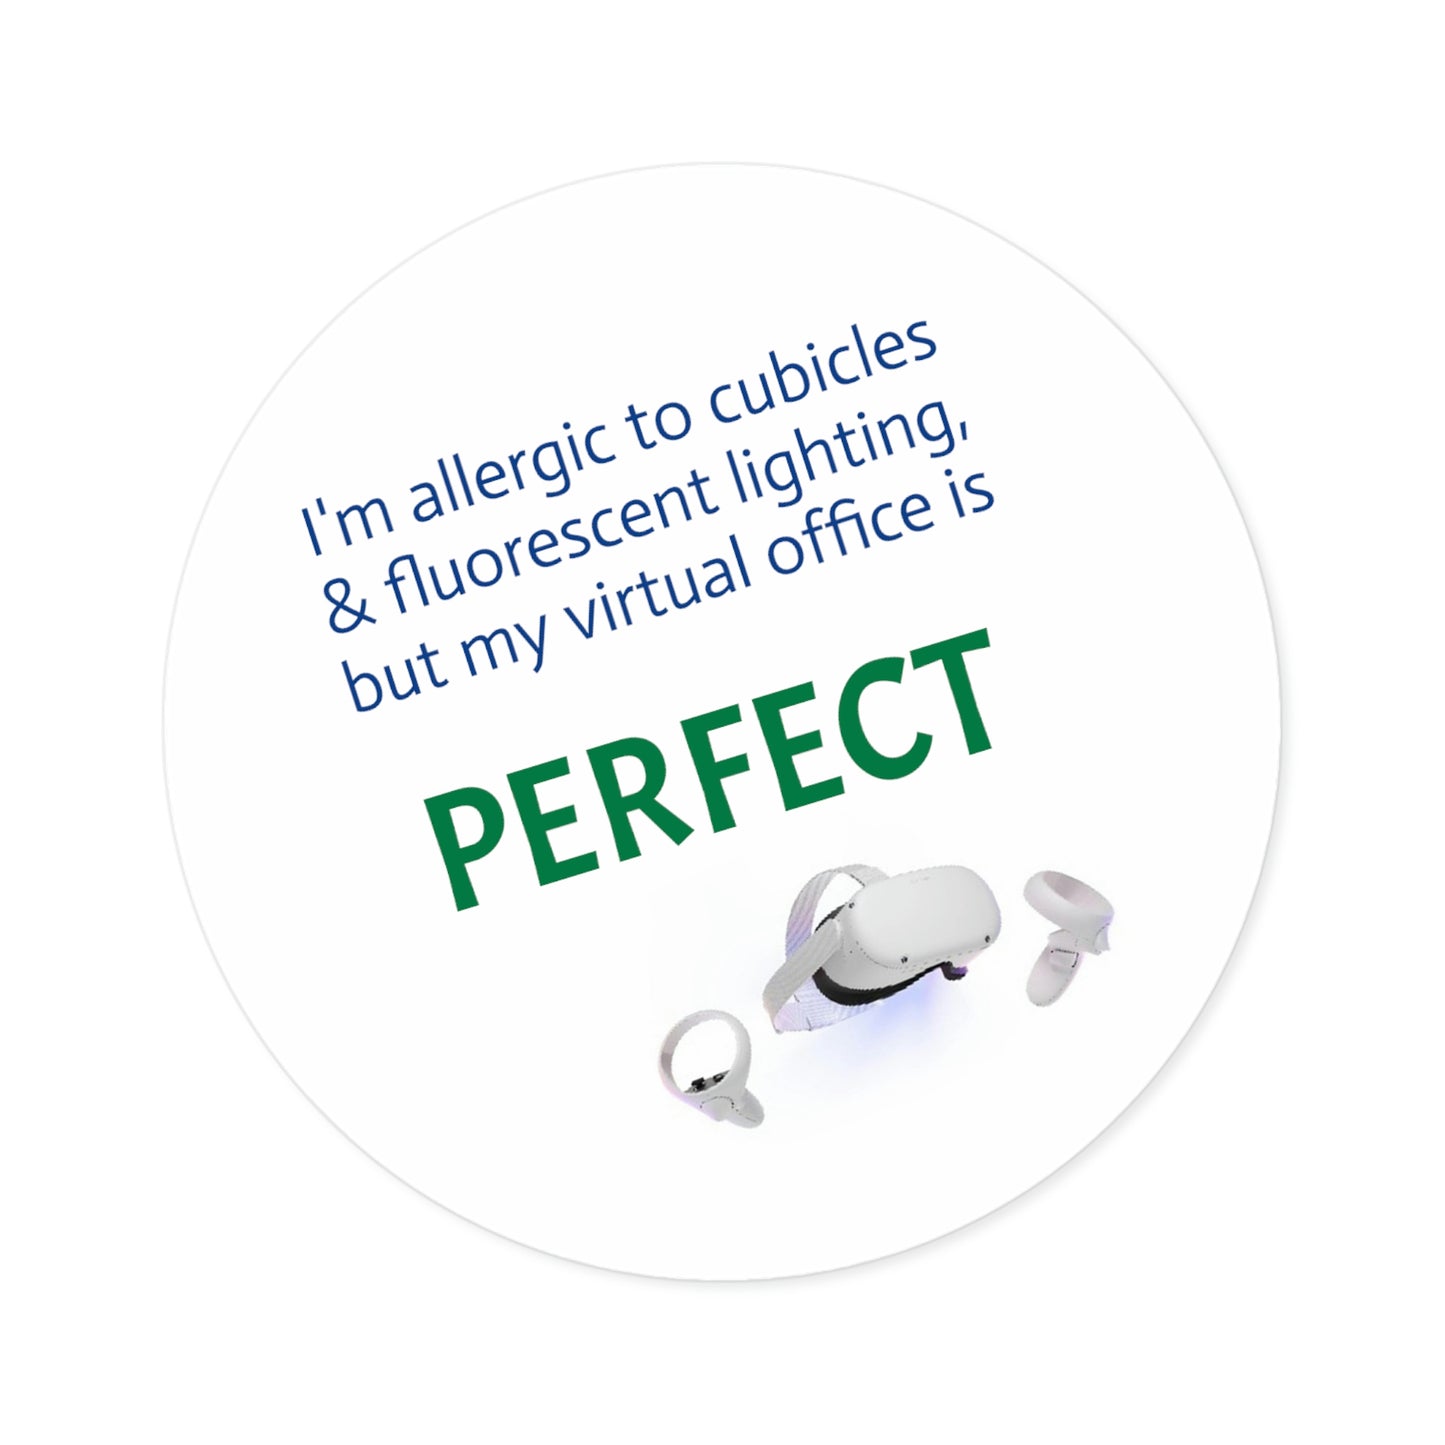 My Virtual Office is Perfect - sticker